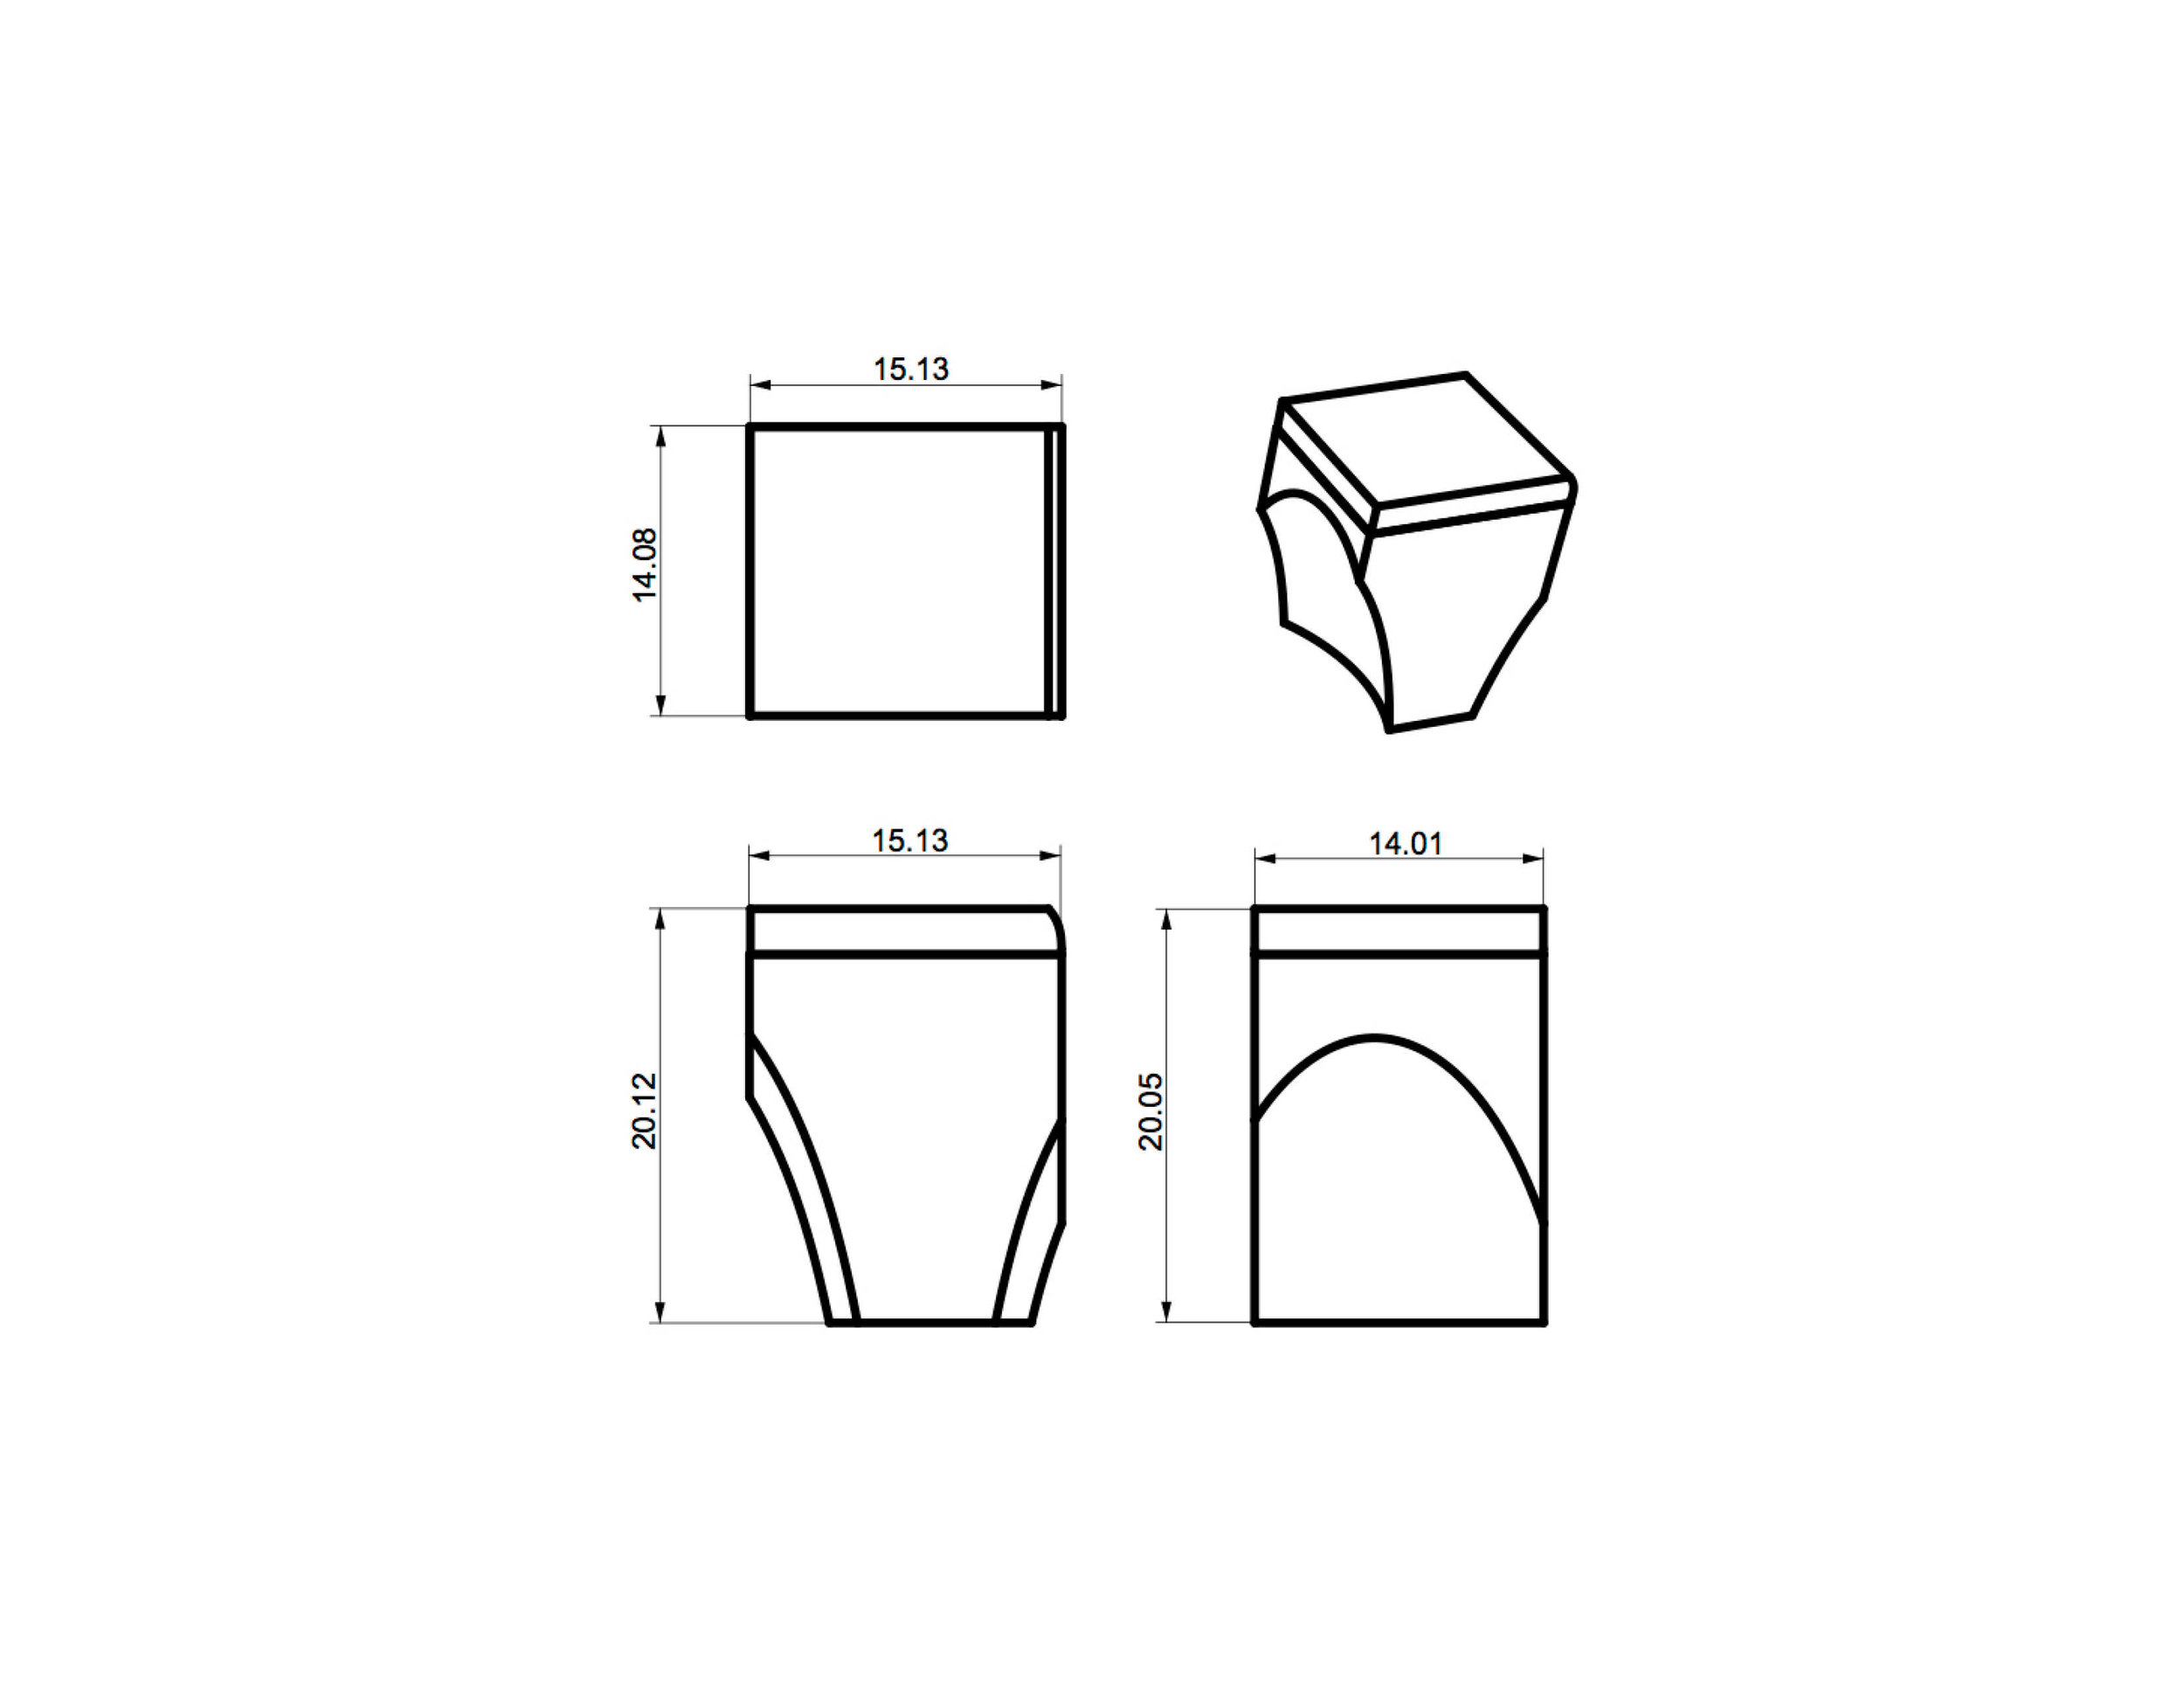 Stool Concept 1: Orthographic Projections